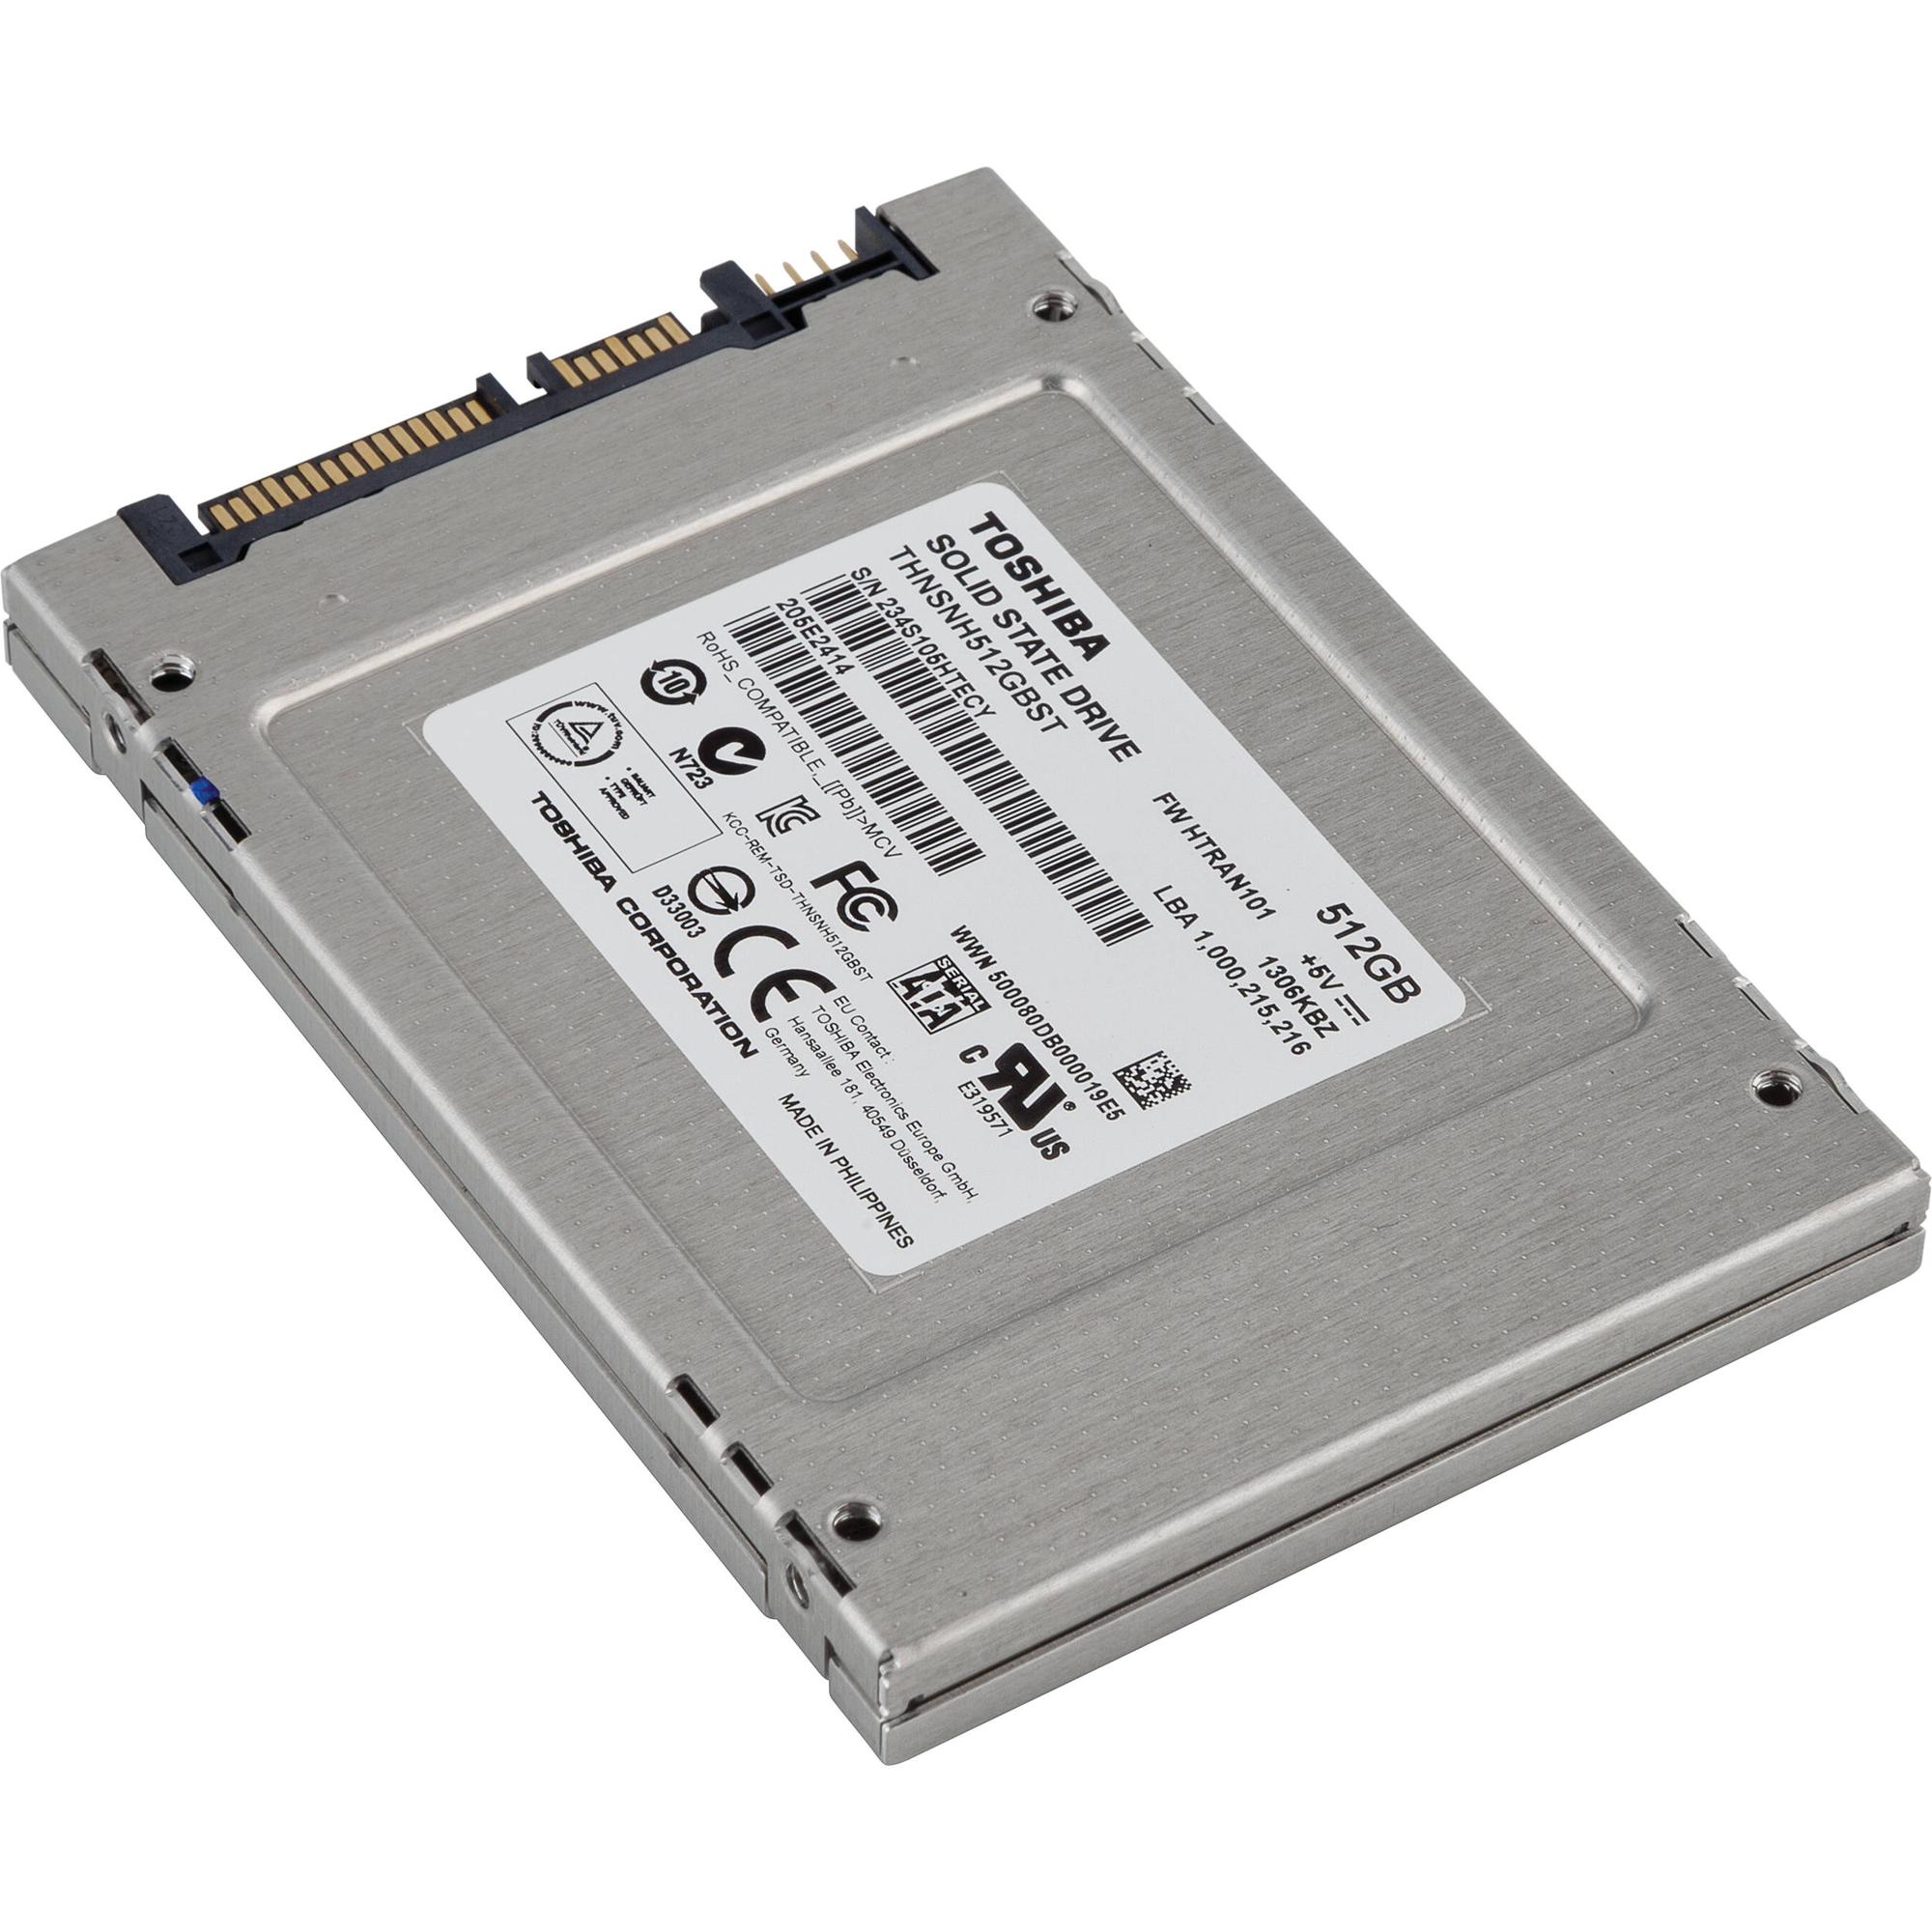 ssd-(solid-state-drive)